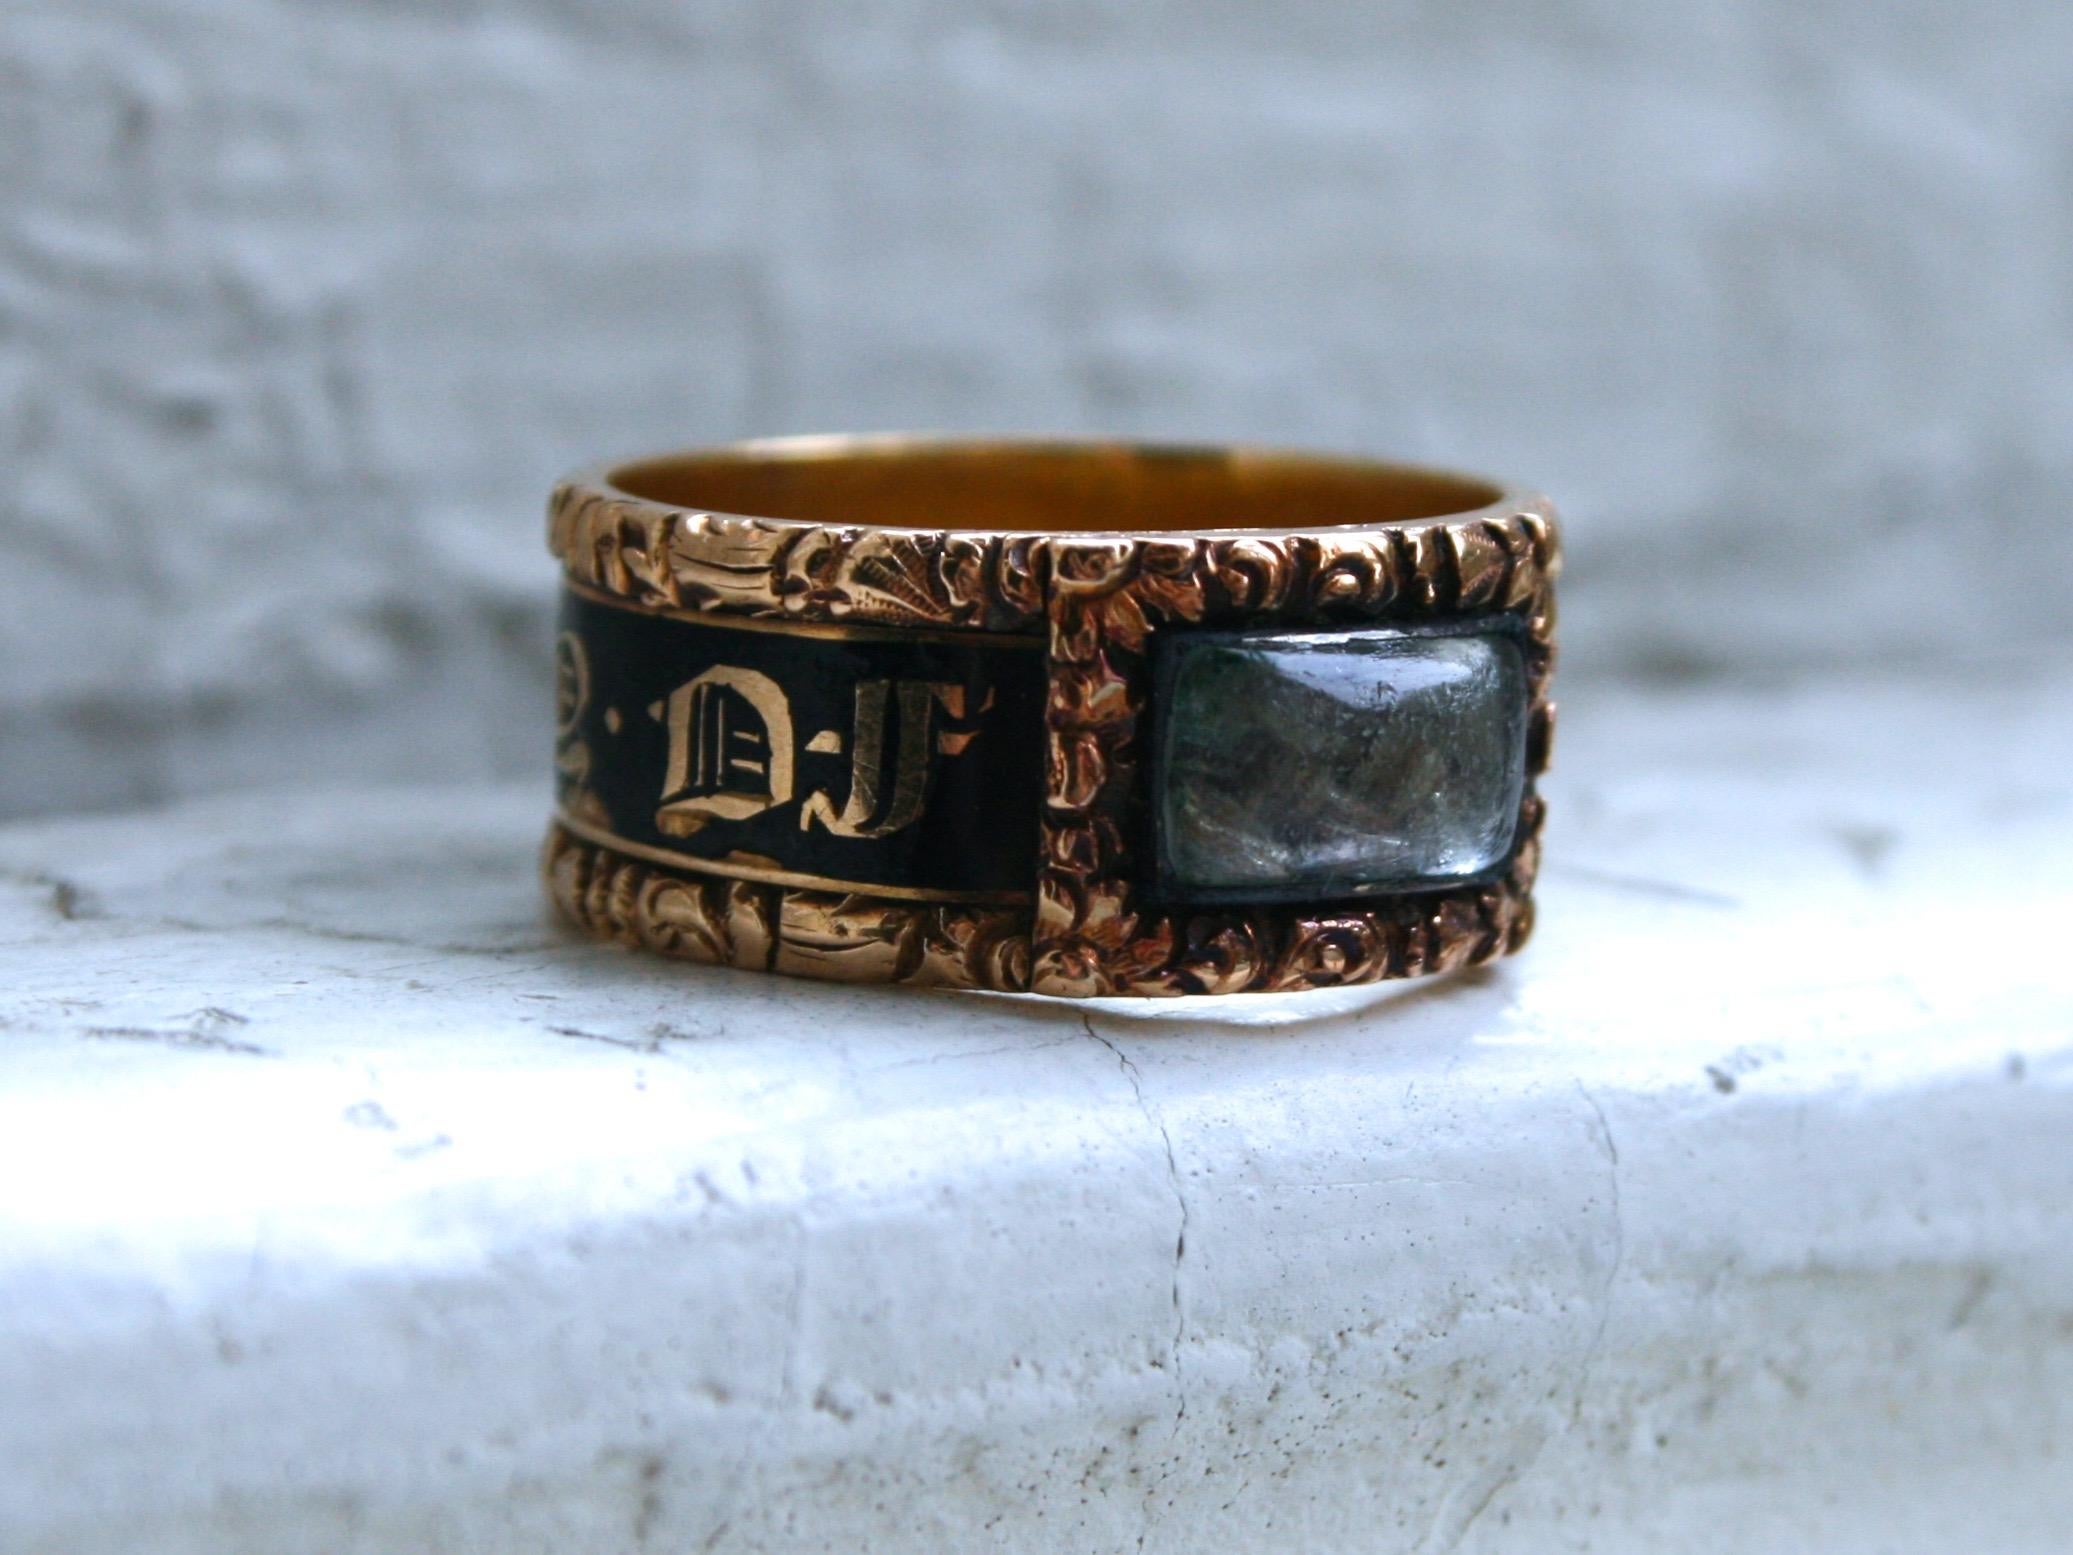 I normally do not buy jewelry with hair, but this Amazing Georgian Antique Mourning Ring was just too significant to pass up! Mourning rings were intended to commemorate the lost of a loved one, and although the idea dates back to Roman times, and